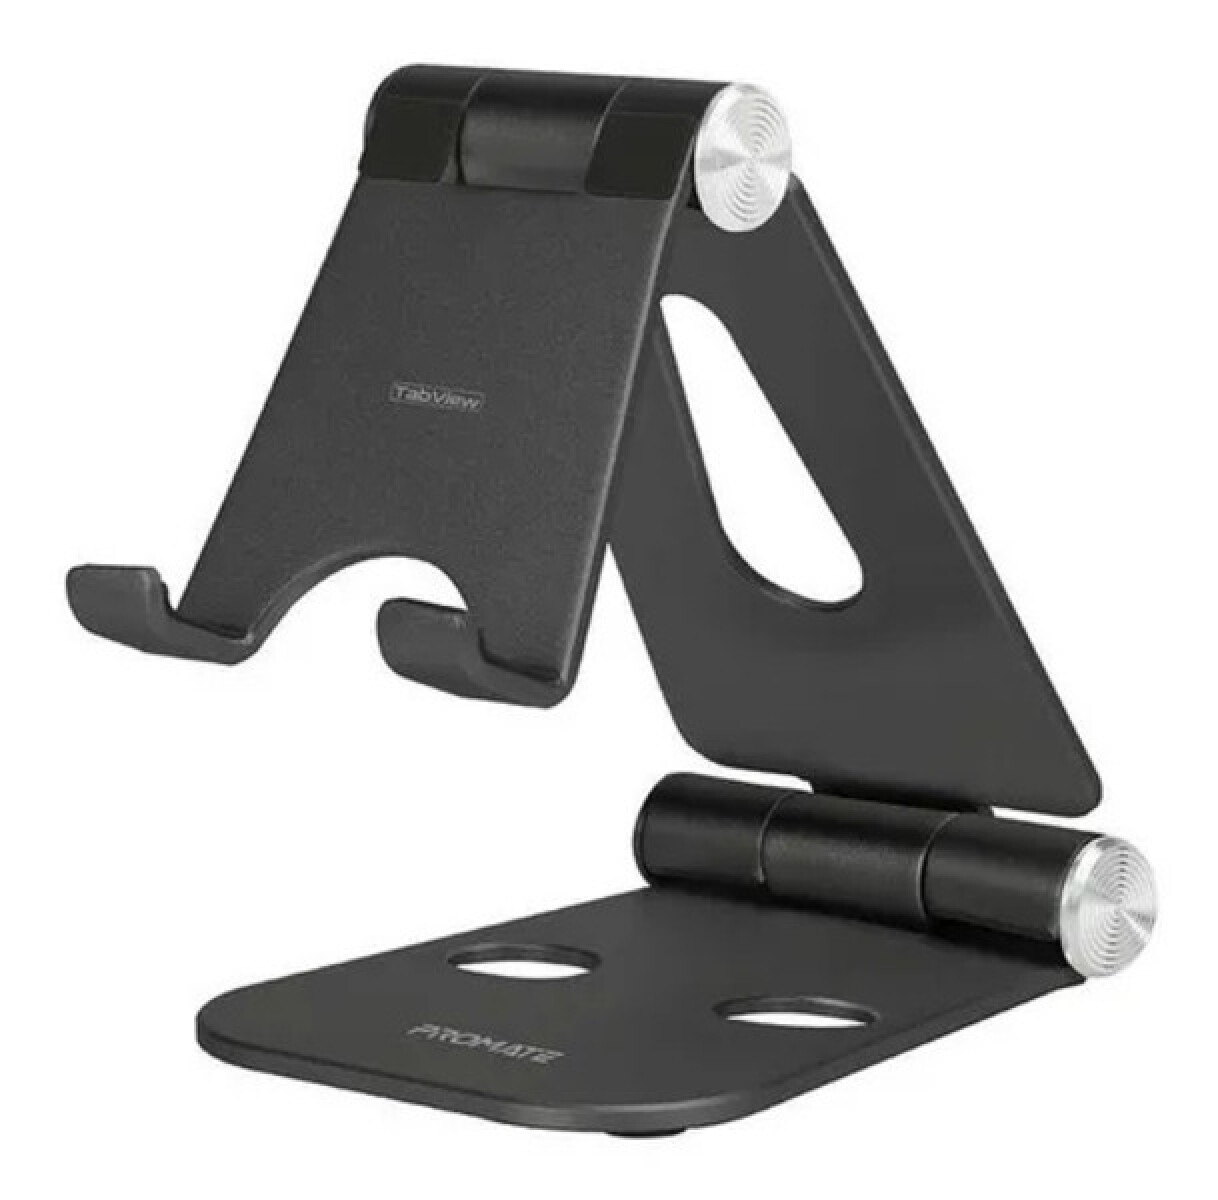 PROMATE TABVIEW STAND DE ALUMINIO PARA TABLET Y SAMRTPHONE - Promate Tabview Stand De Aluminio Para Tablet Y Samrtphone 